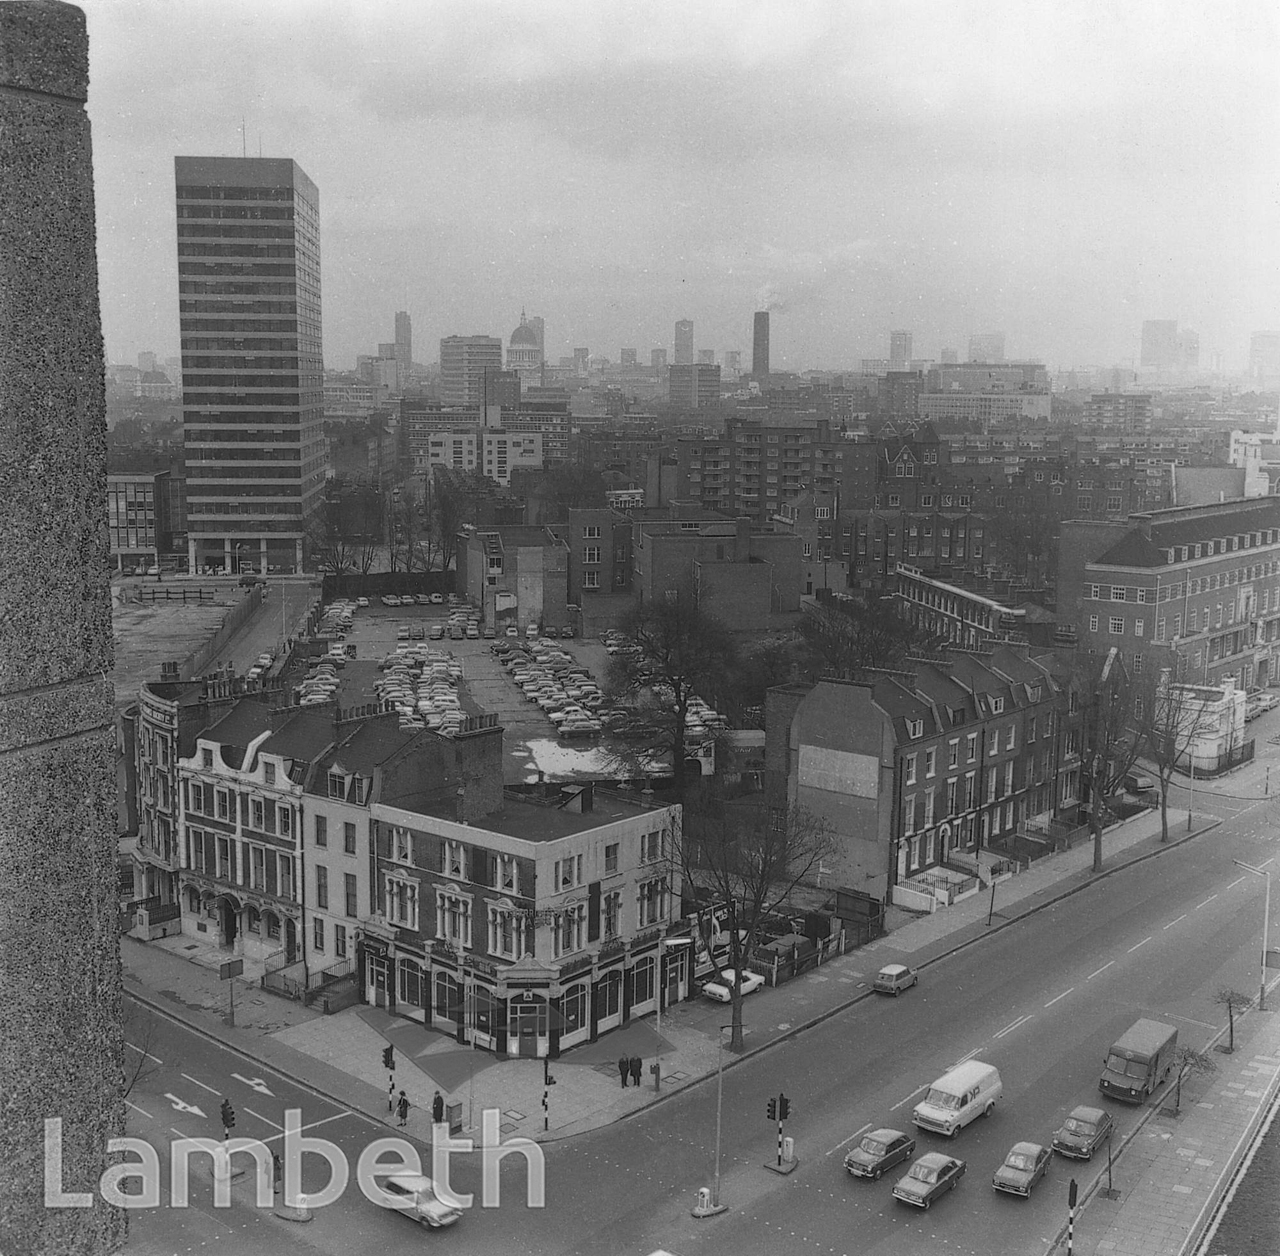 VIEW FROM LAMBETH TOWER, LAMBETH ROAD